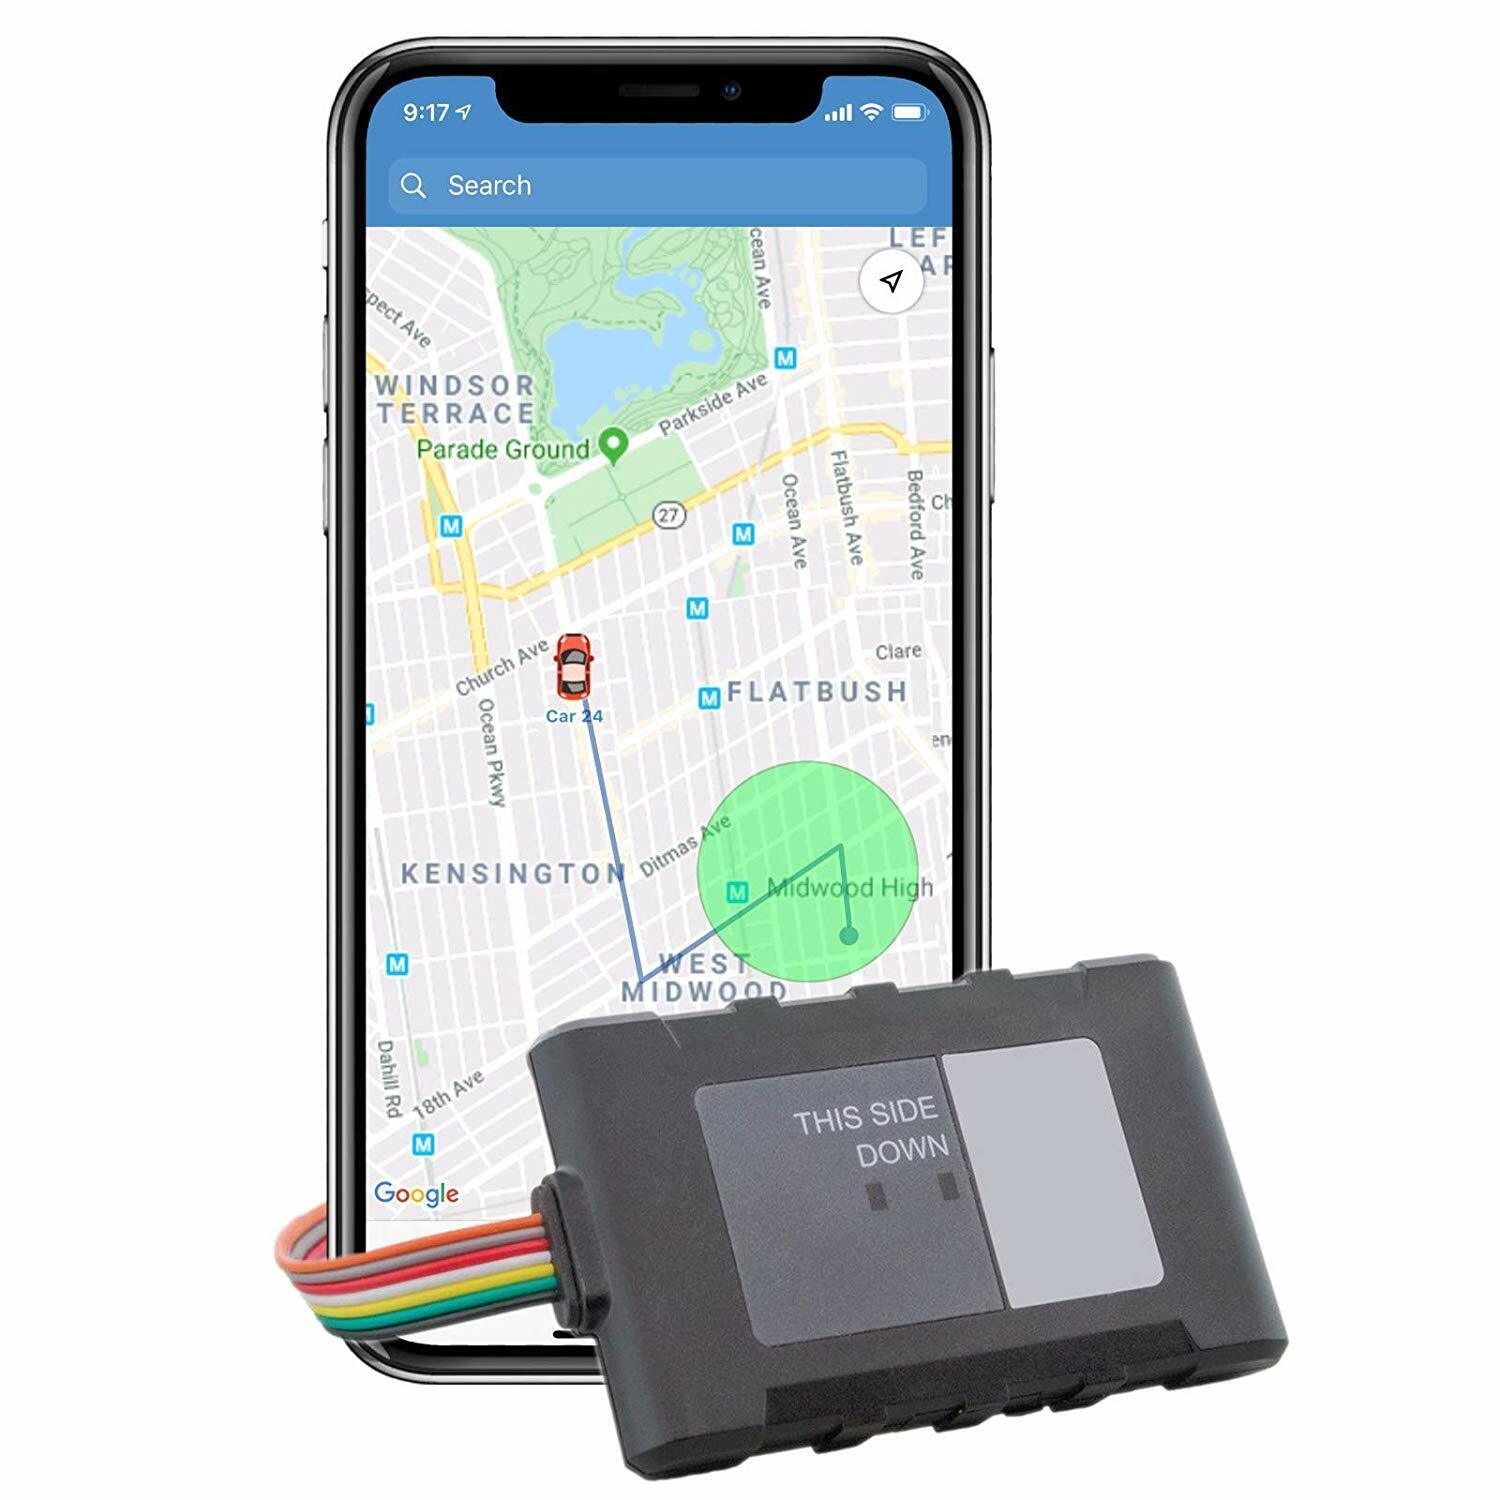 Brickhouse LTE Livewire Vehicle GPS Tracking Device For Motorcycle,Bike, Scooter